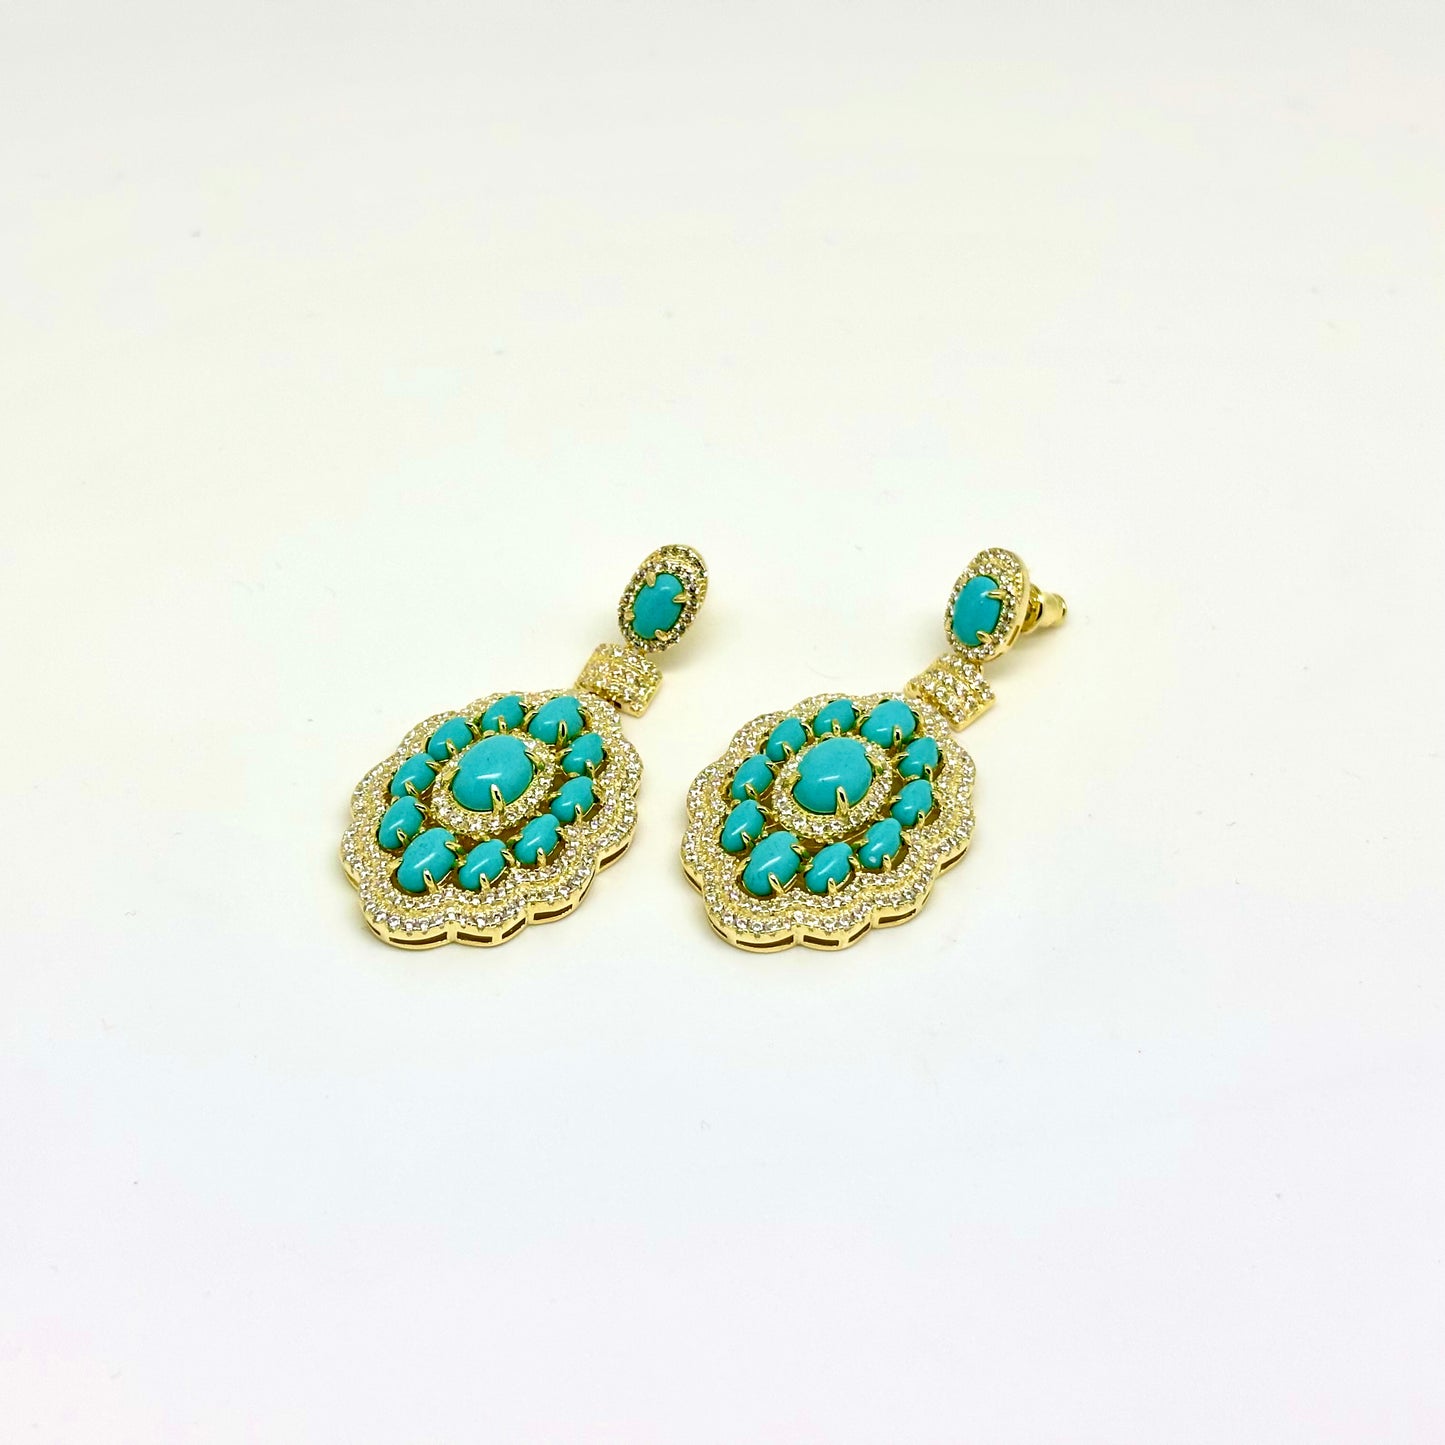 Turquoise and Cubic Zirconia Earrings in Gold Plated Sterling Silver